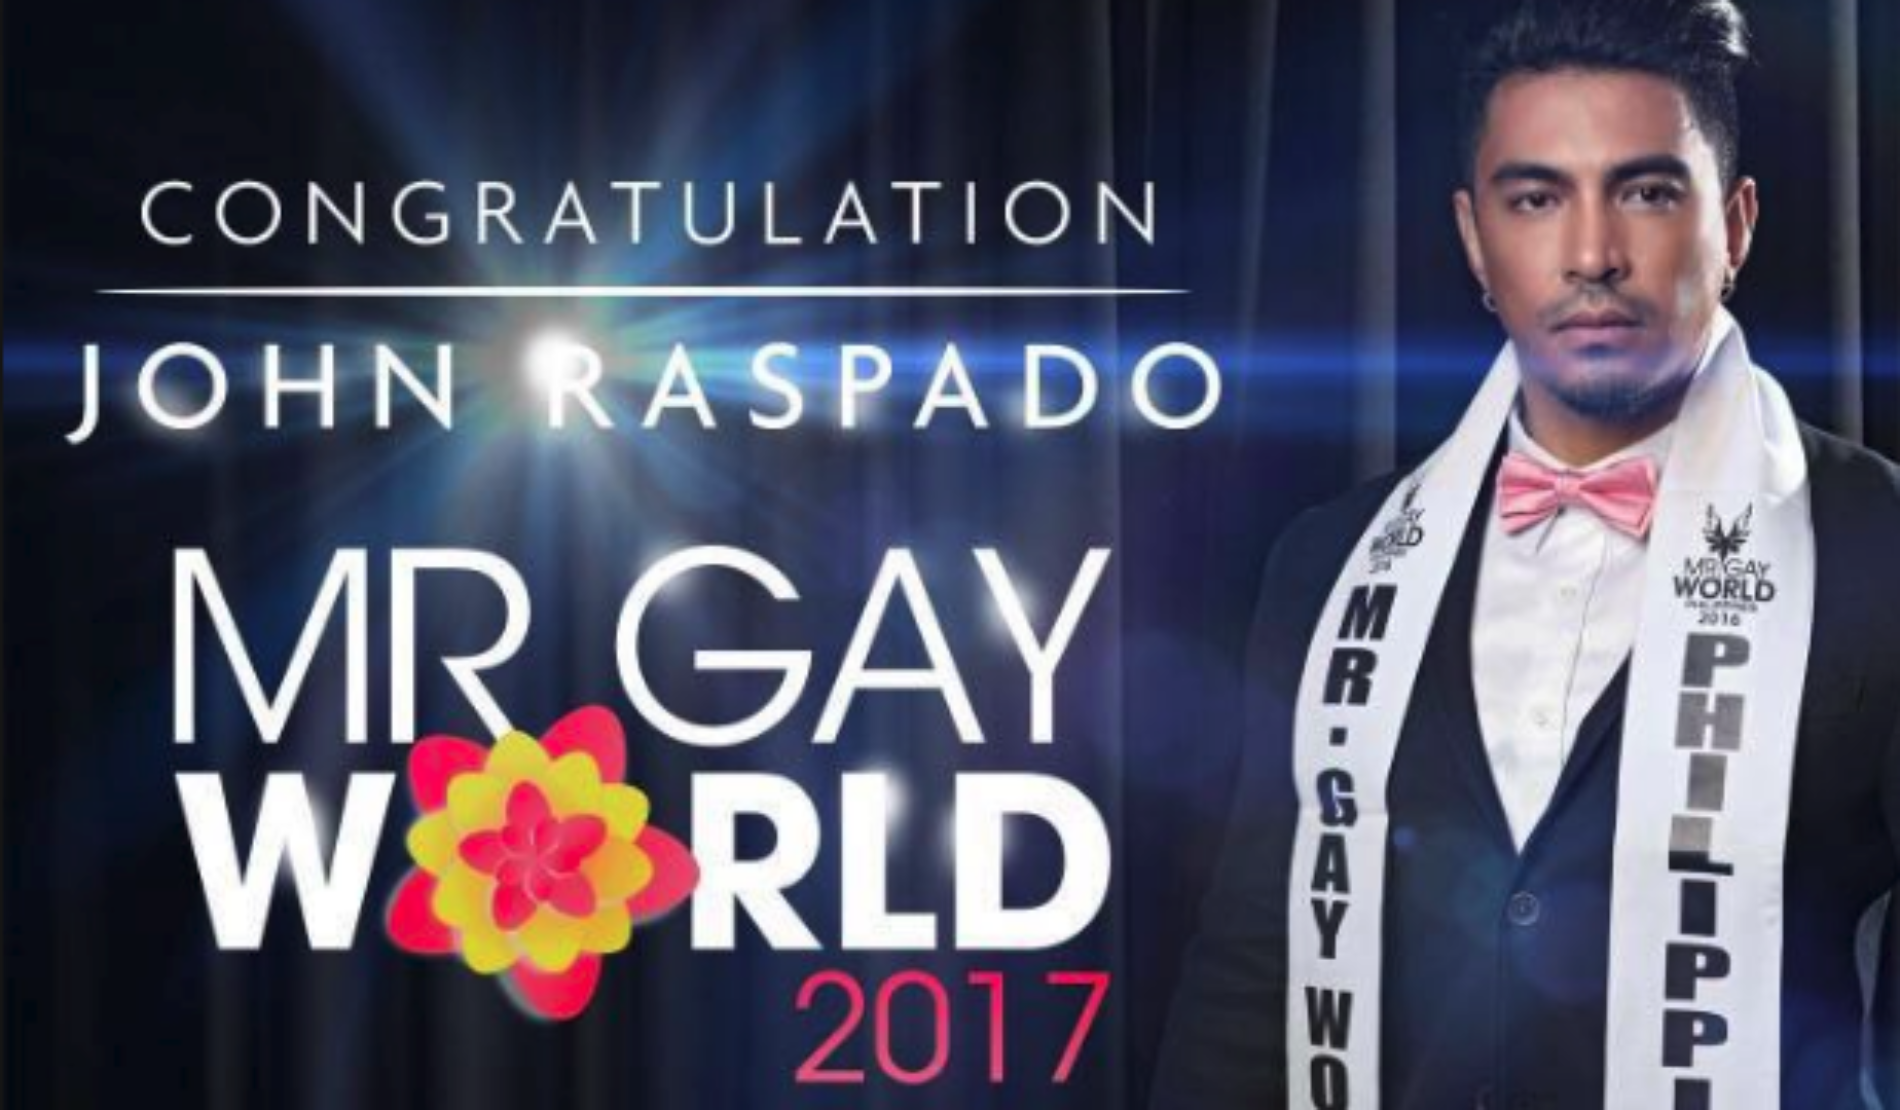 Mr Gay World 2017 Is Crowned